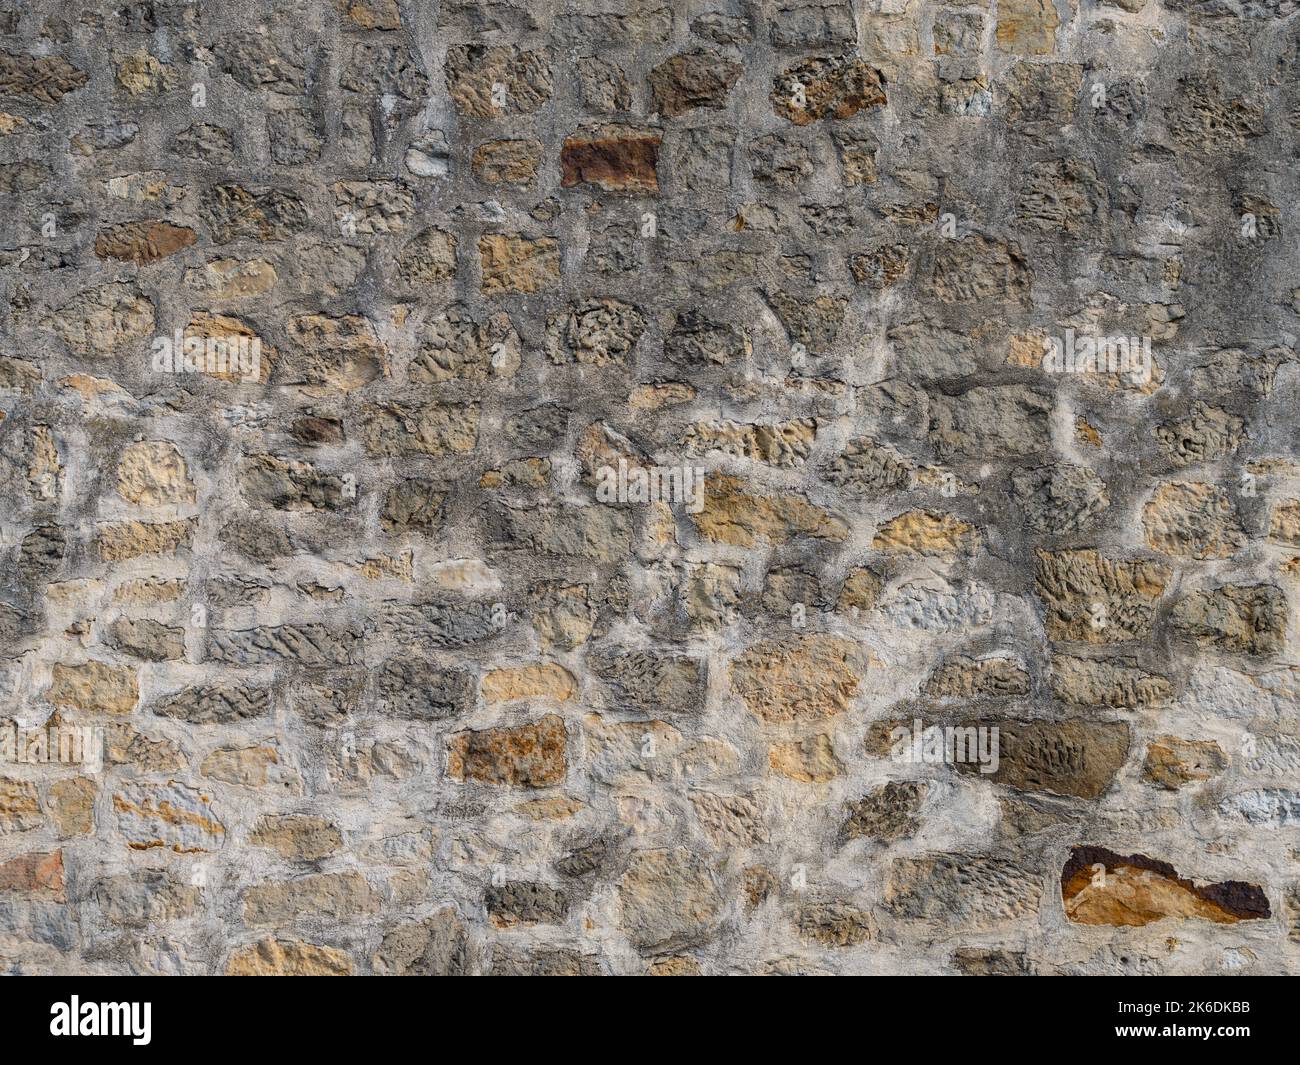 Old stone wall texture with different natural stones. Abstract background from a building exterior. Weathered rough masonry pattern of the material. Stock Photo